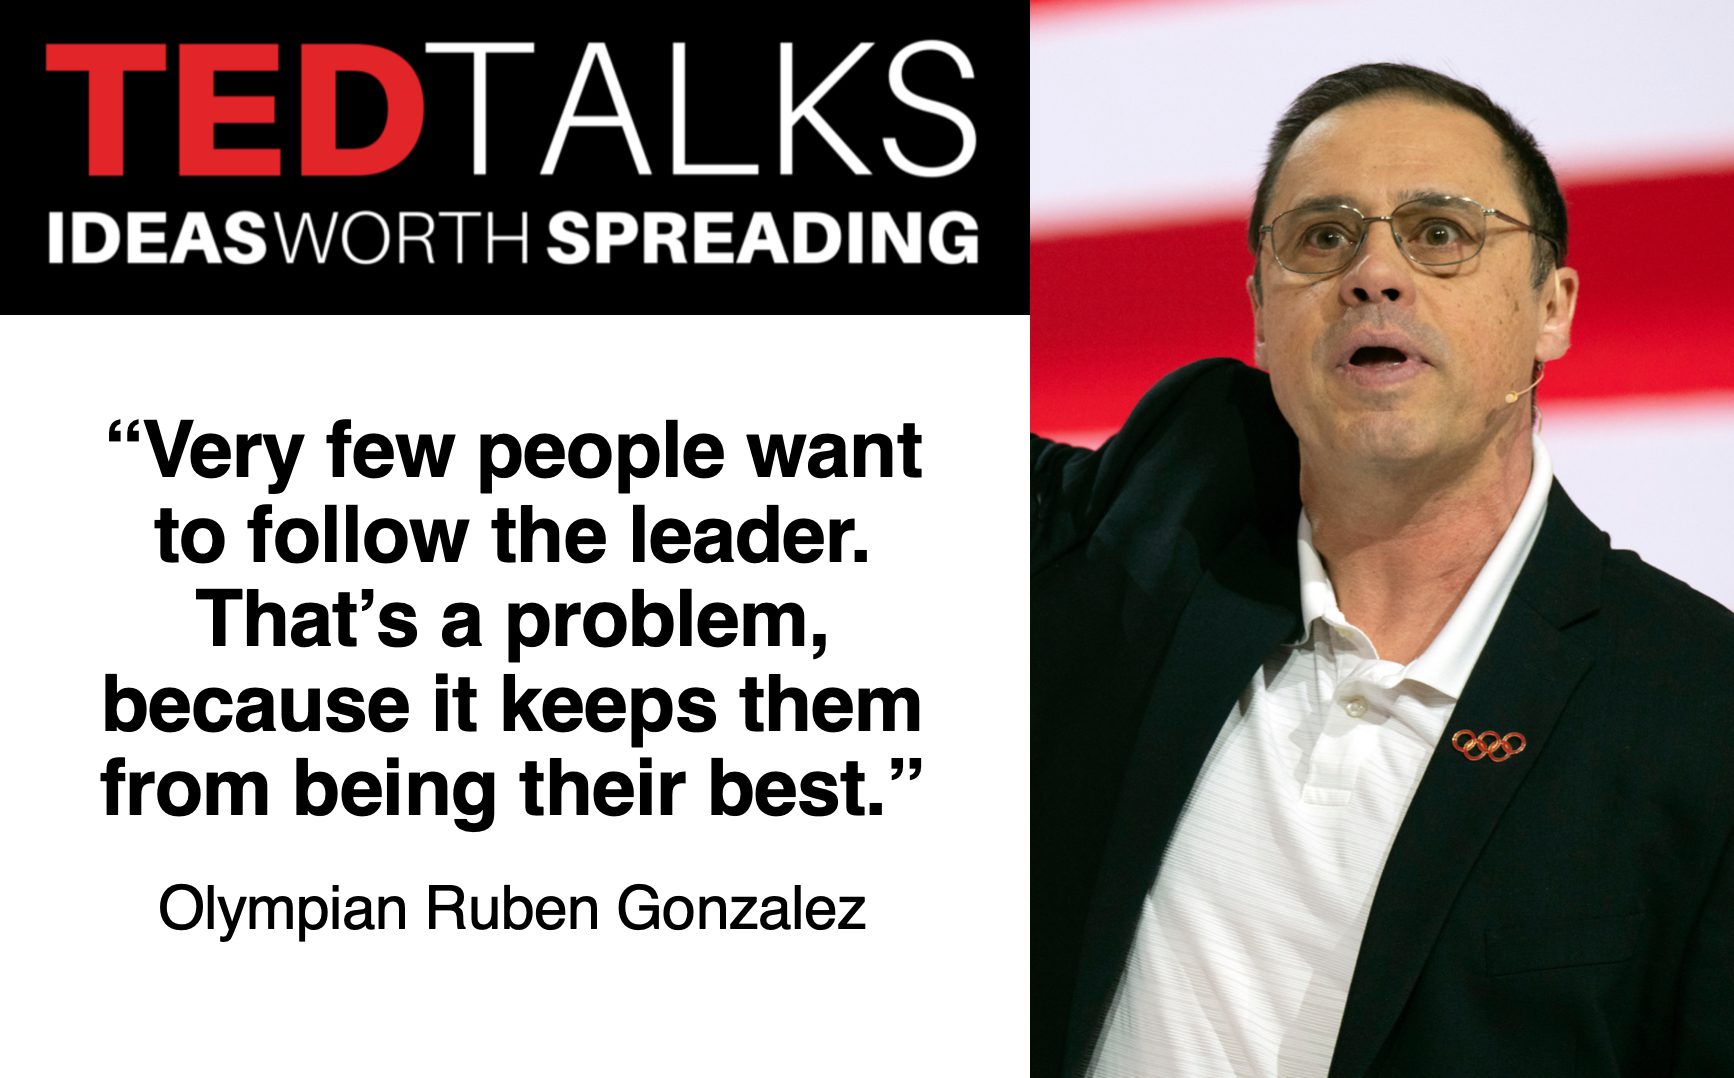 TED talk by TED speaker Ruben Gonzalez. A leadership TEDx talk that will help you achieve your goals faster.